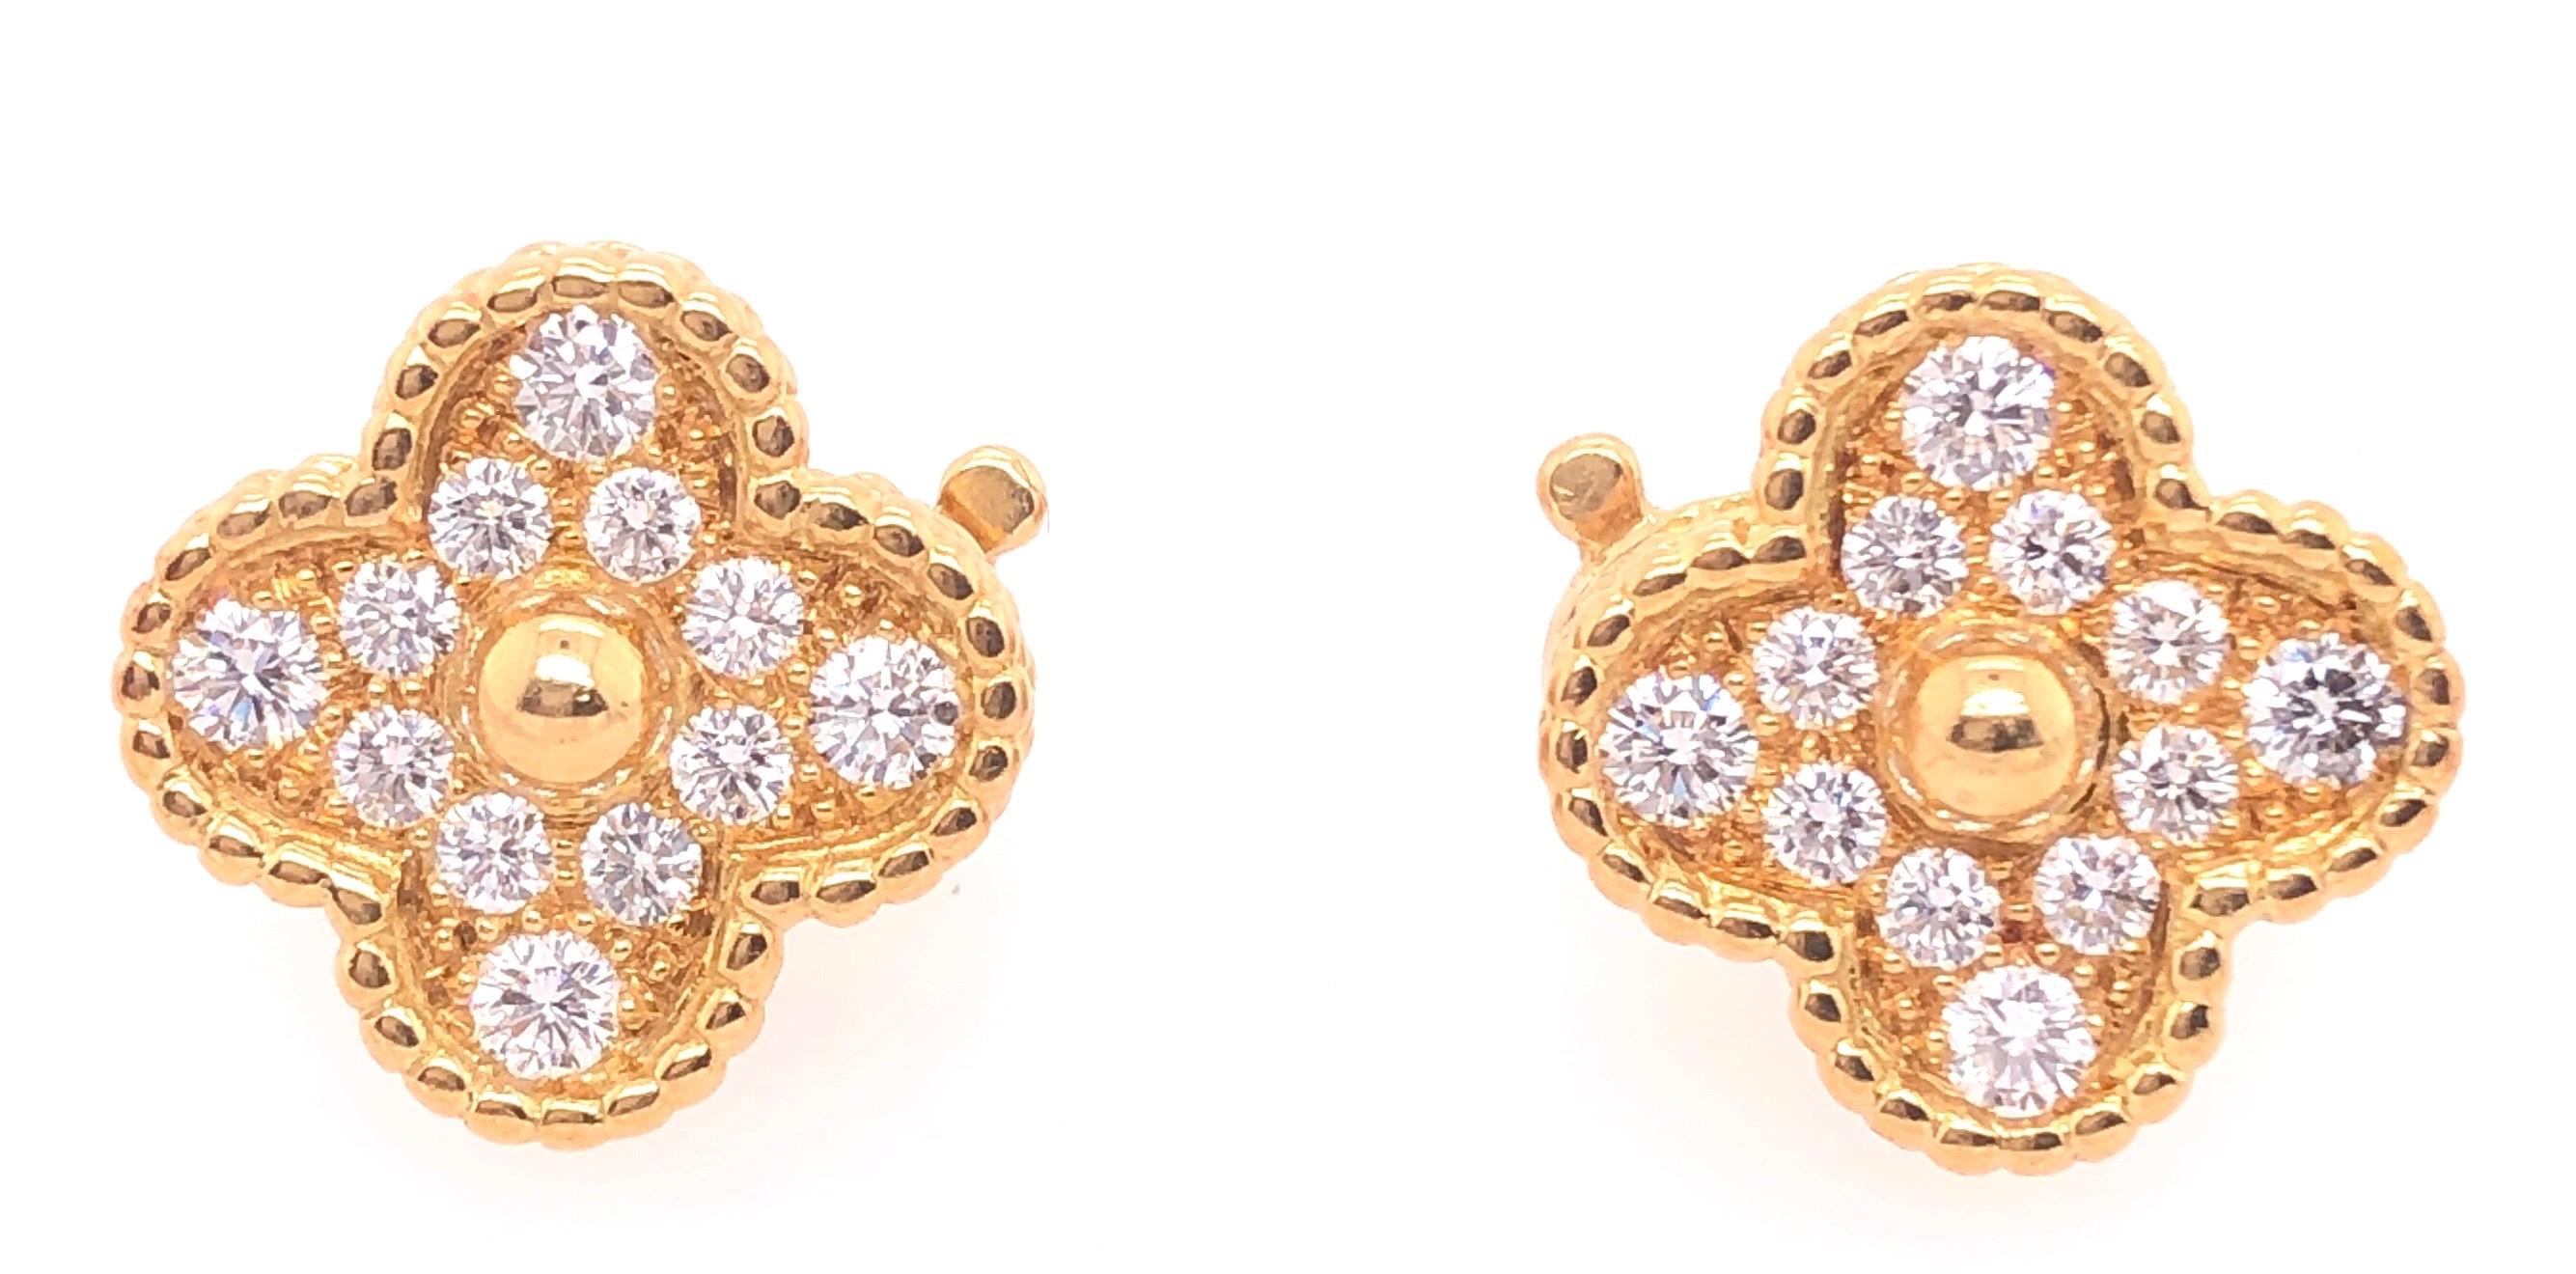 Yellow Gold with Round Diamonds Van Cleef & Arpels Alhambra Earrings. Inspired by the clover leaf, these icons of luck are adorned with a border of golden beads. Faithful to the very first Alhambra® jewel created in 1968, the Vintage Alhambra